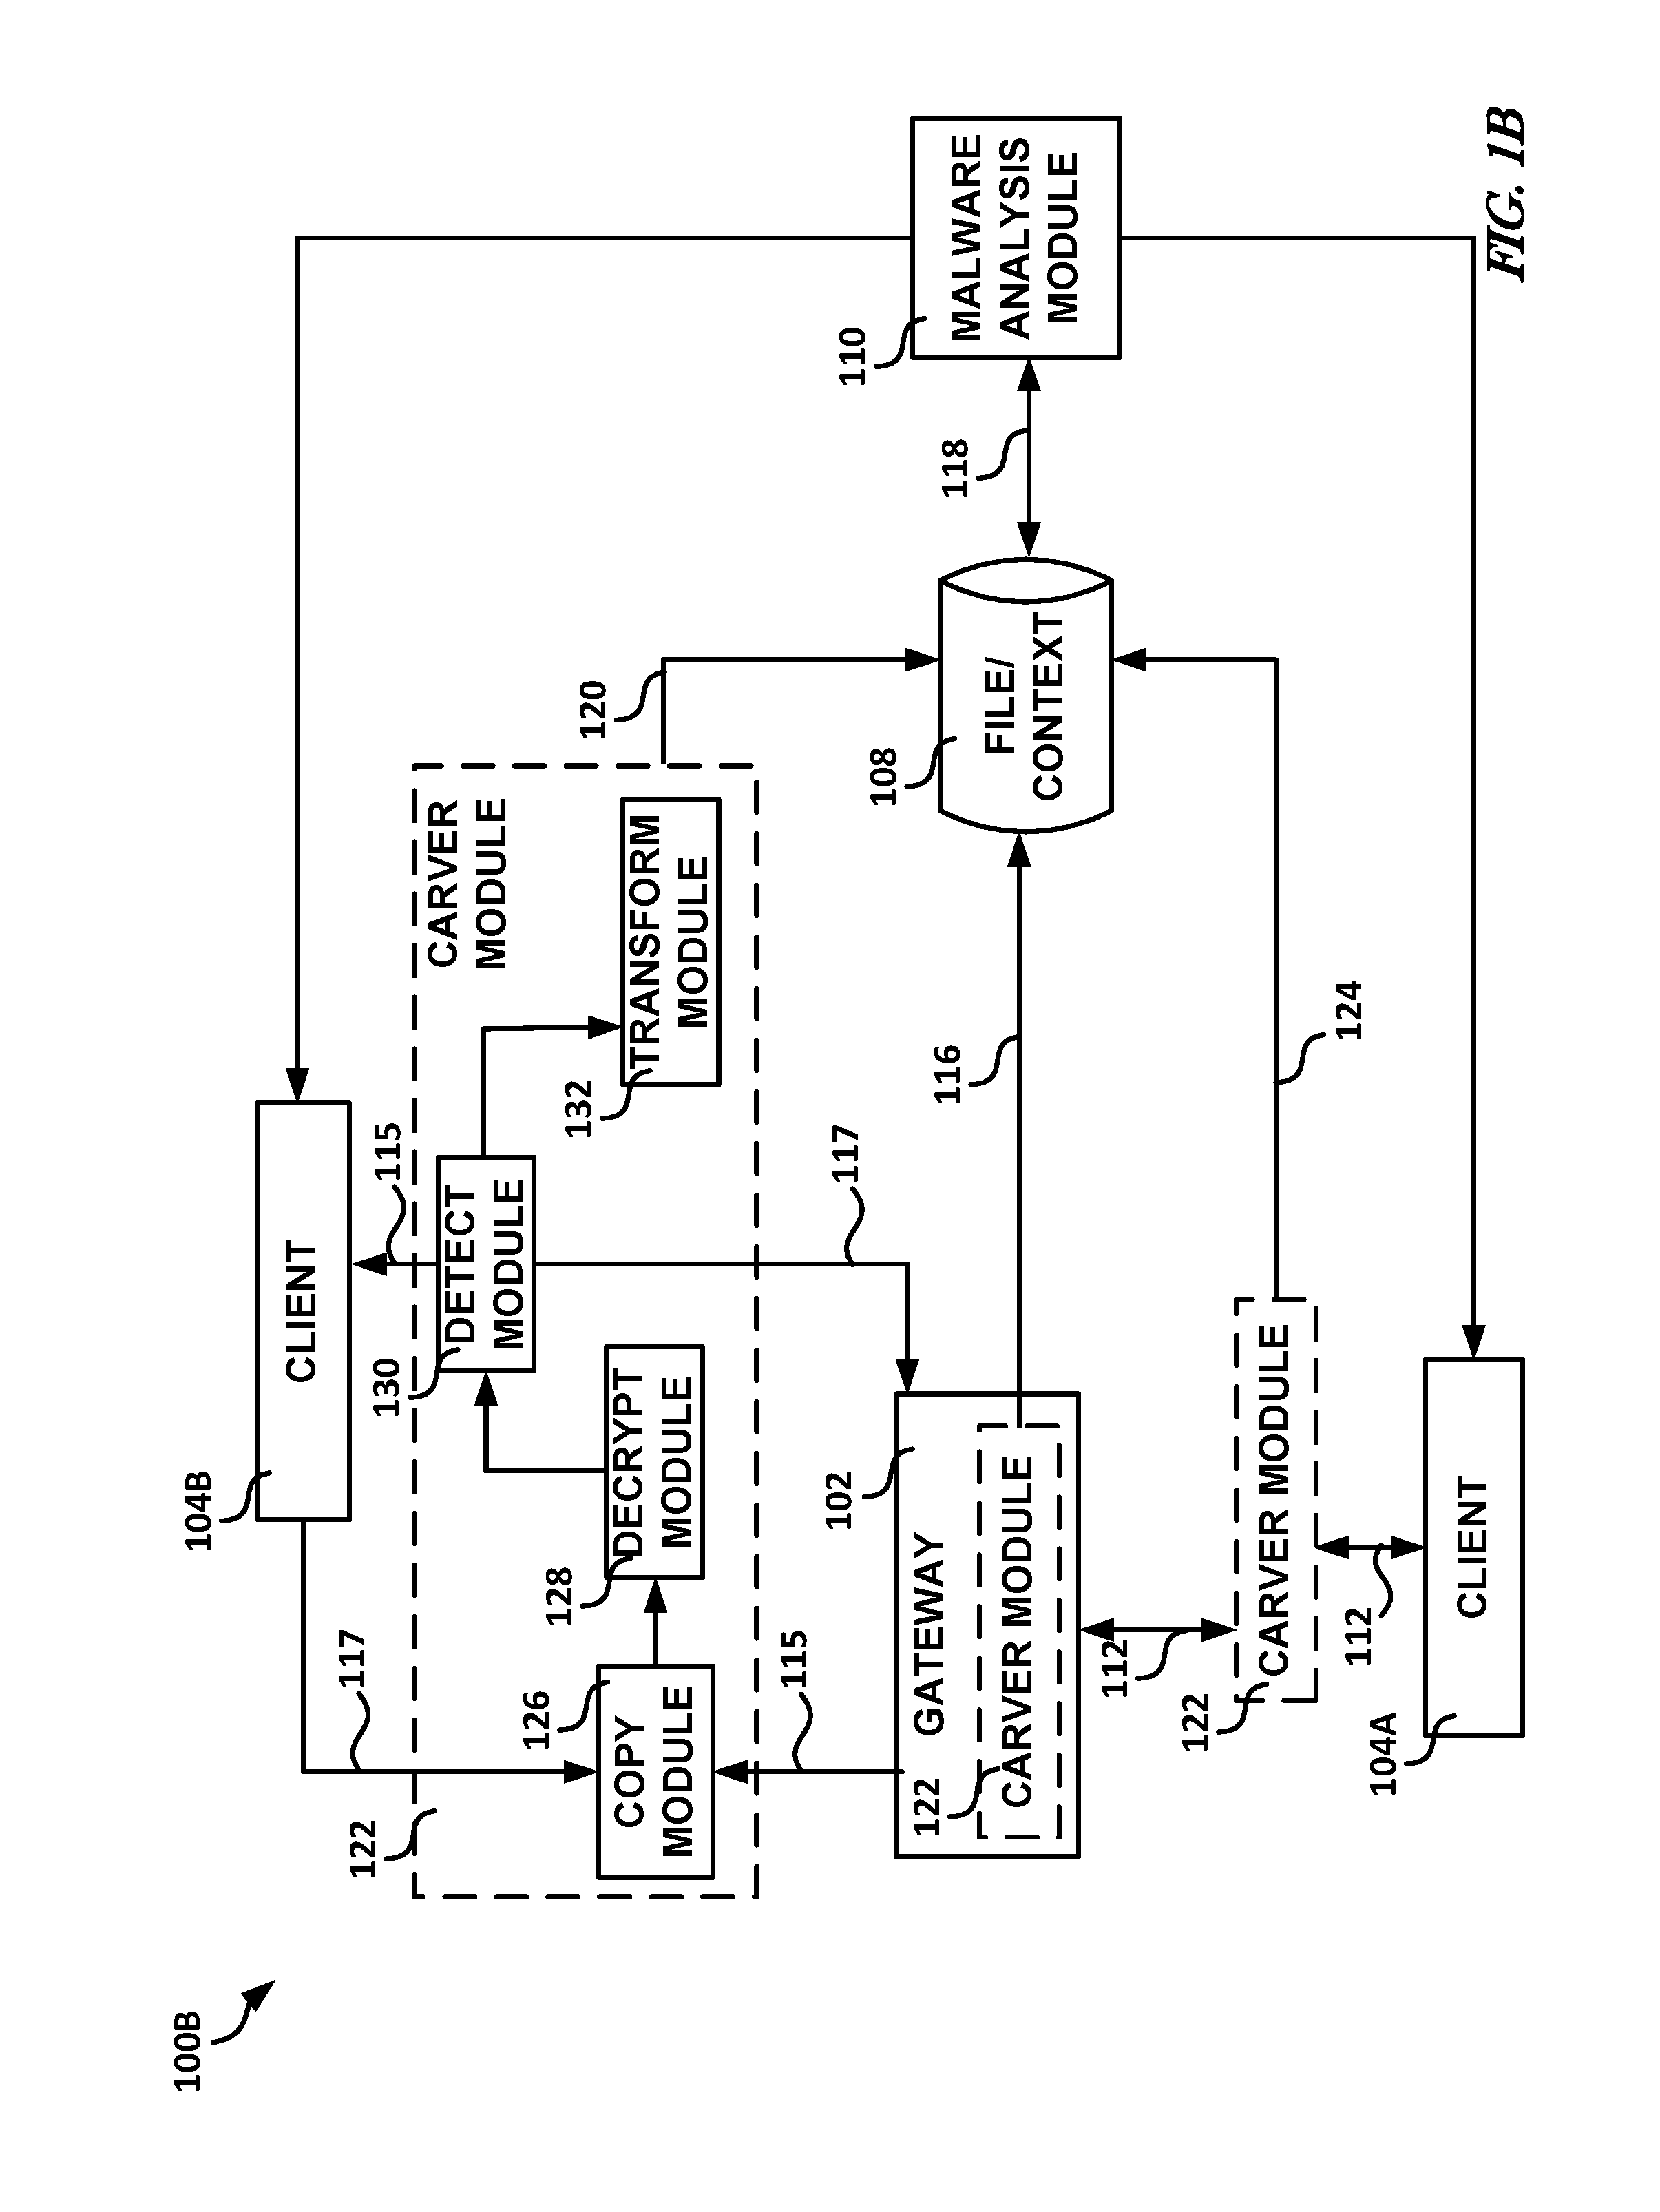 Systems and methods for malware analysis of network traffic